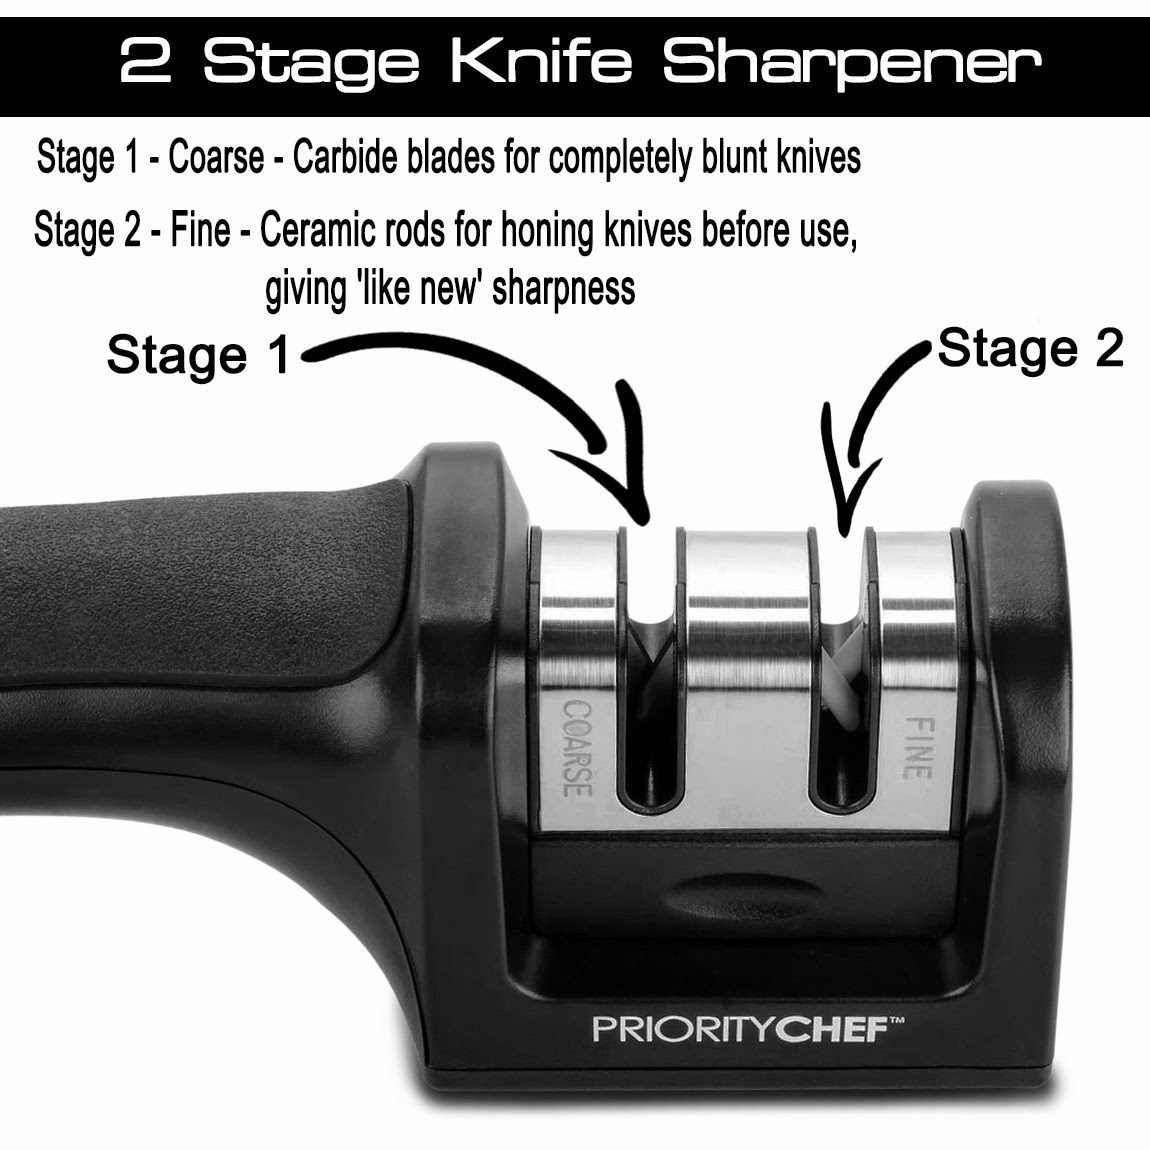  Priority Chef’s knife sharpening system has been designed to turn any dull or blunt knife into as sharp as new. 